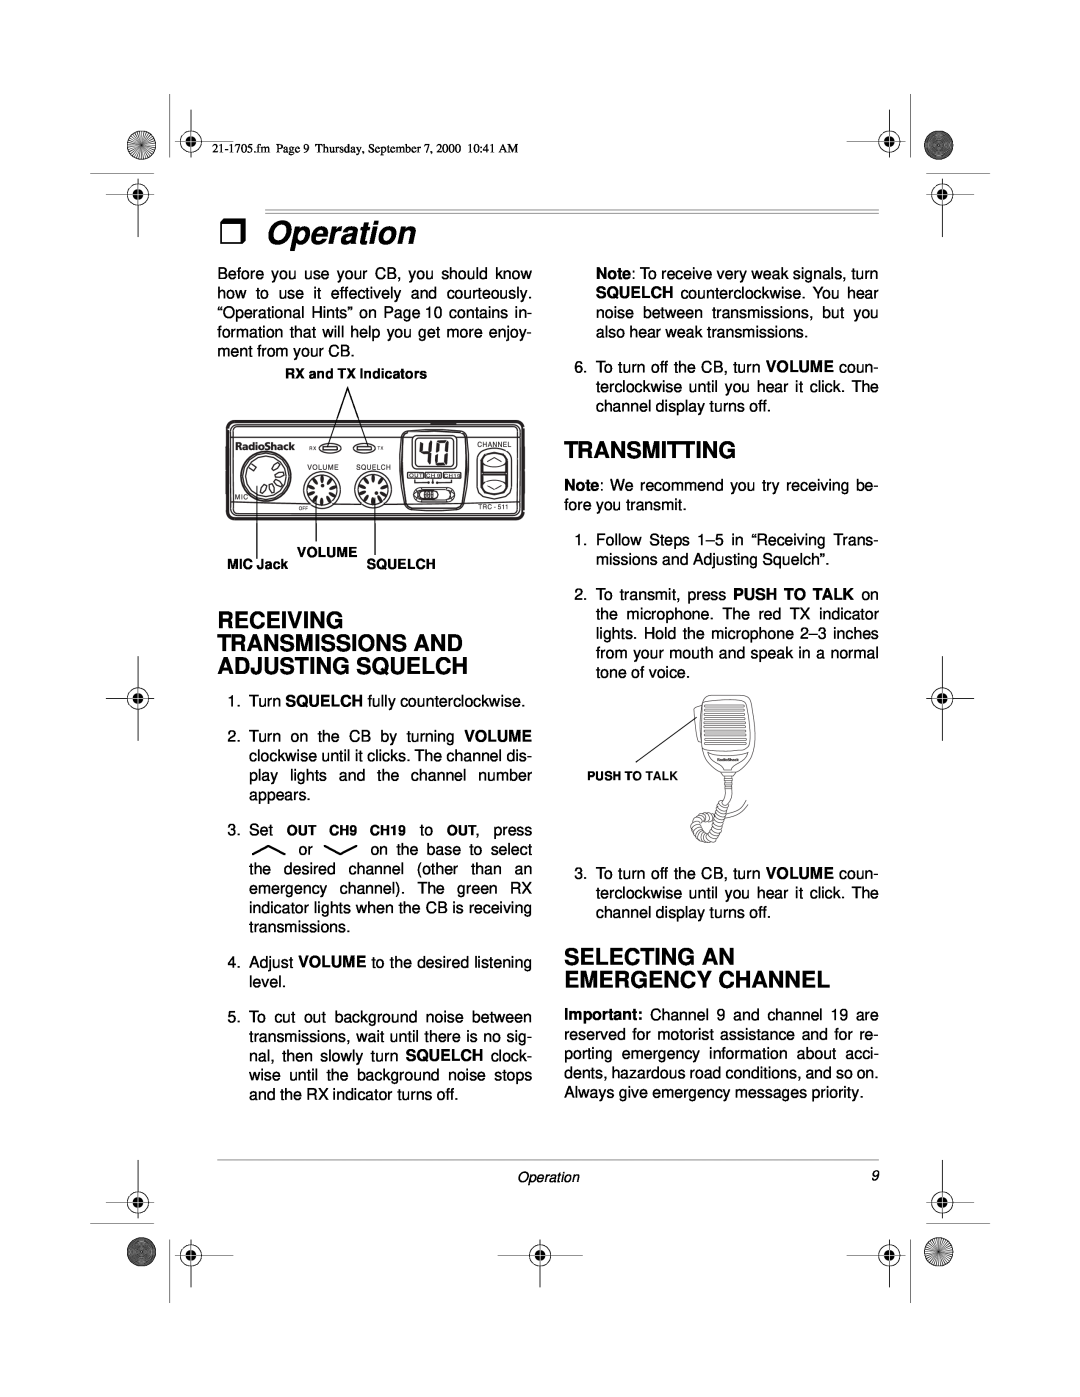 Radio Shack TRC-511 owner manual ˆOperation, Receiving Transmissions And Adjusting Squelch, Transmitting 